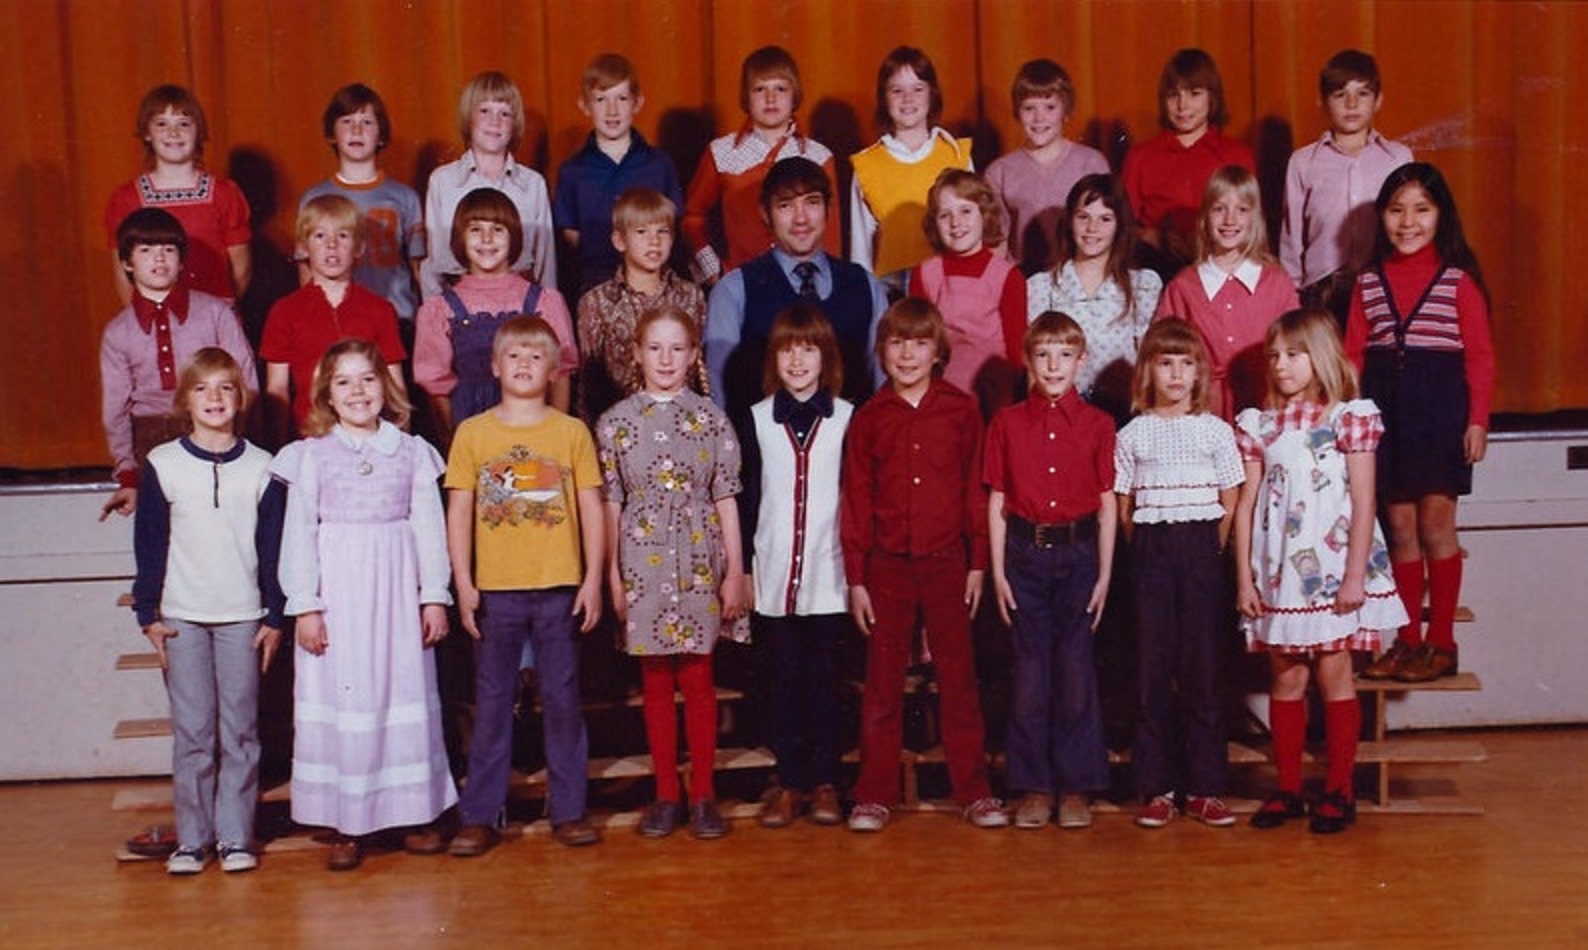 Mr. Barney's 1974-1975 fourth grade class at East Elementary School